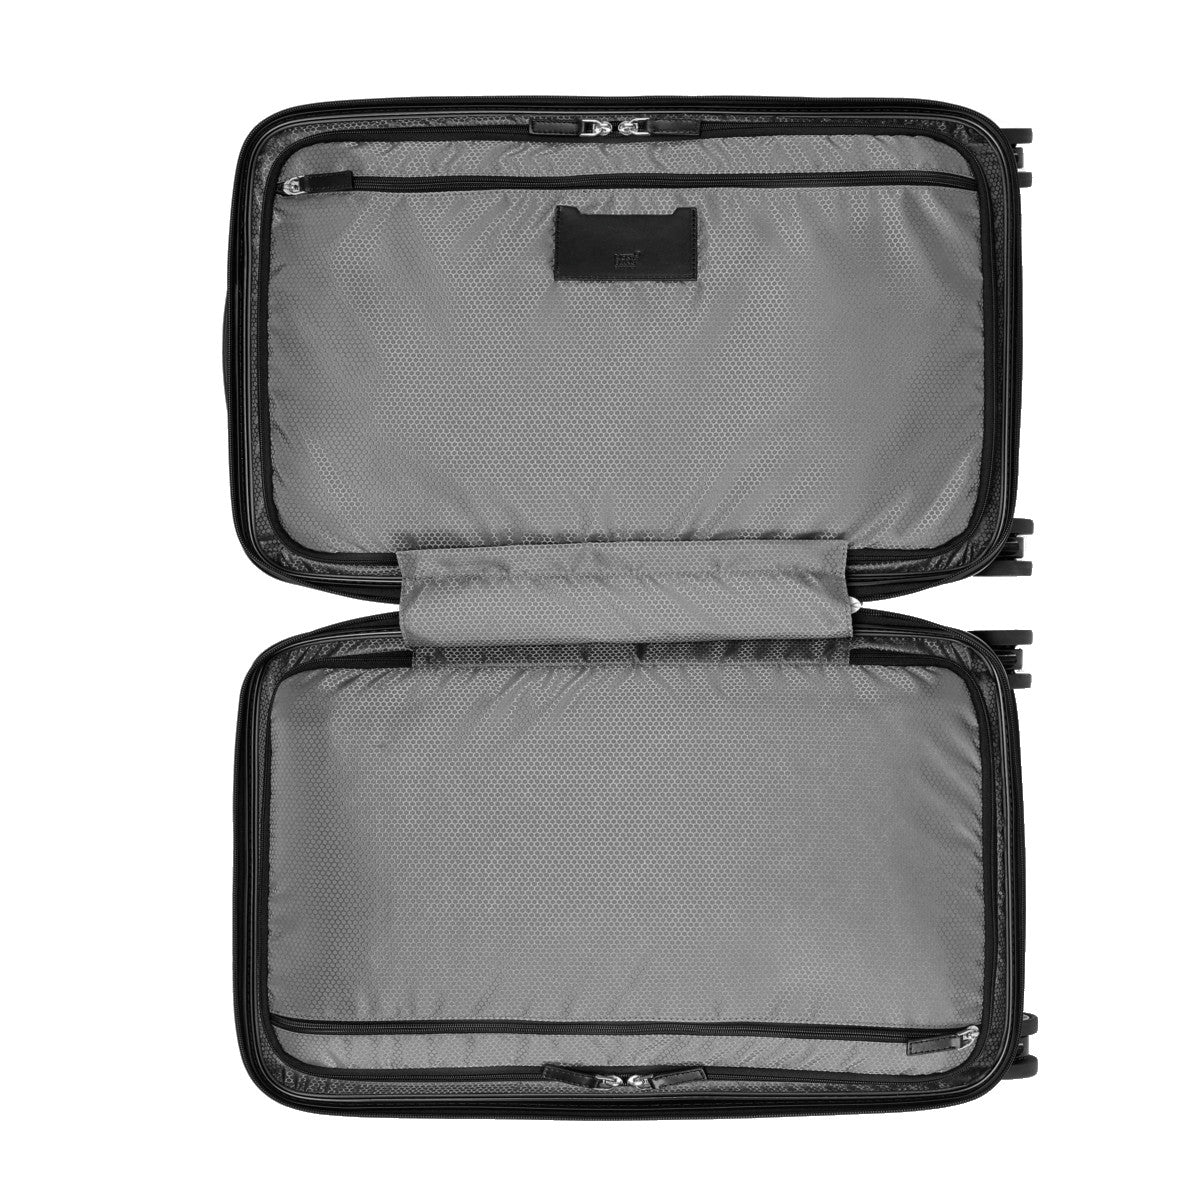 Trolley cabine compact #MY4810 de Montblanc